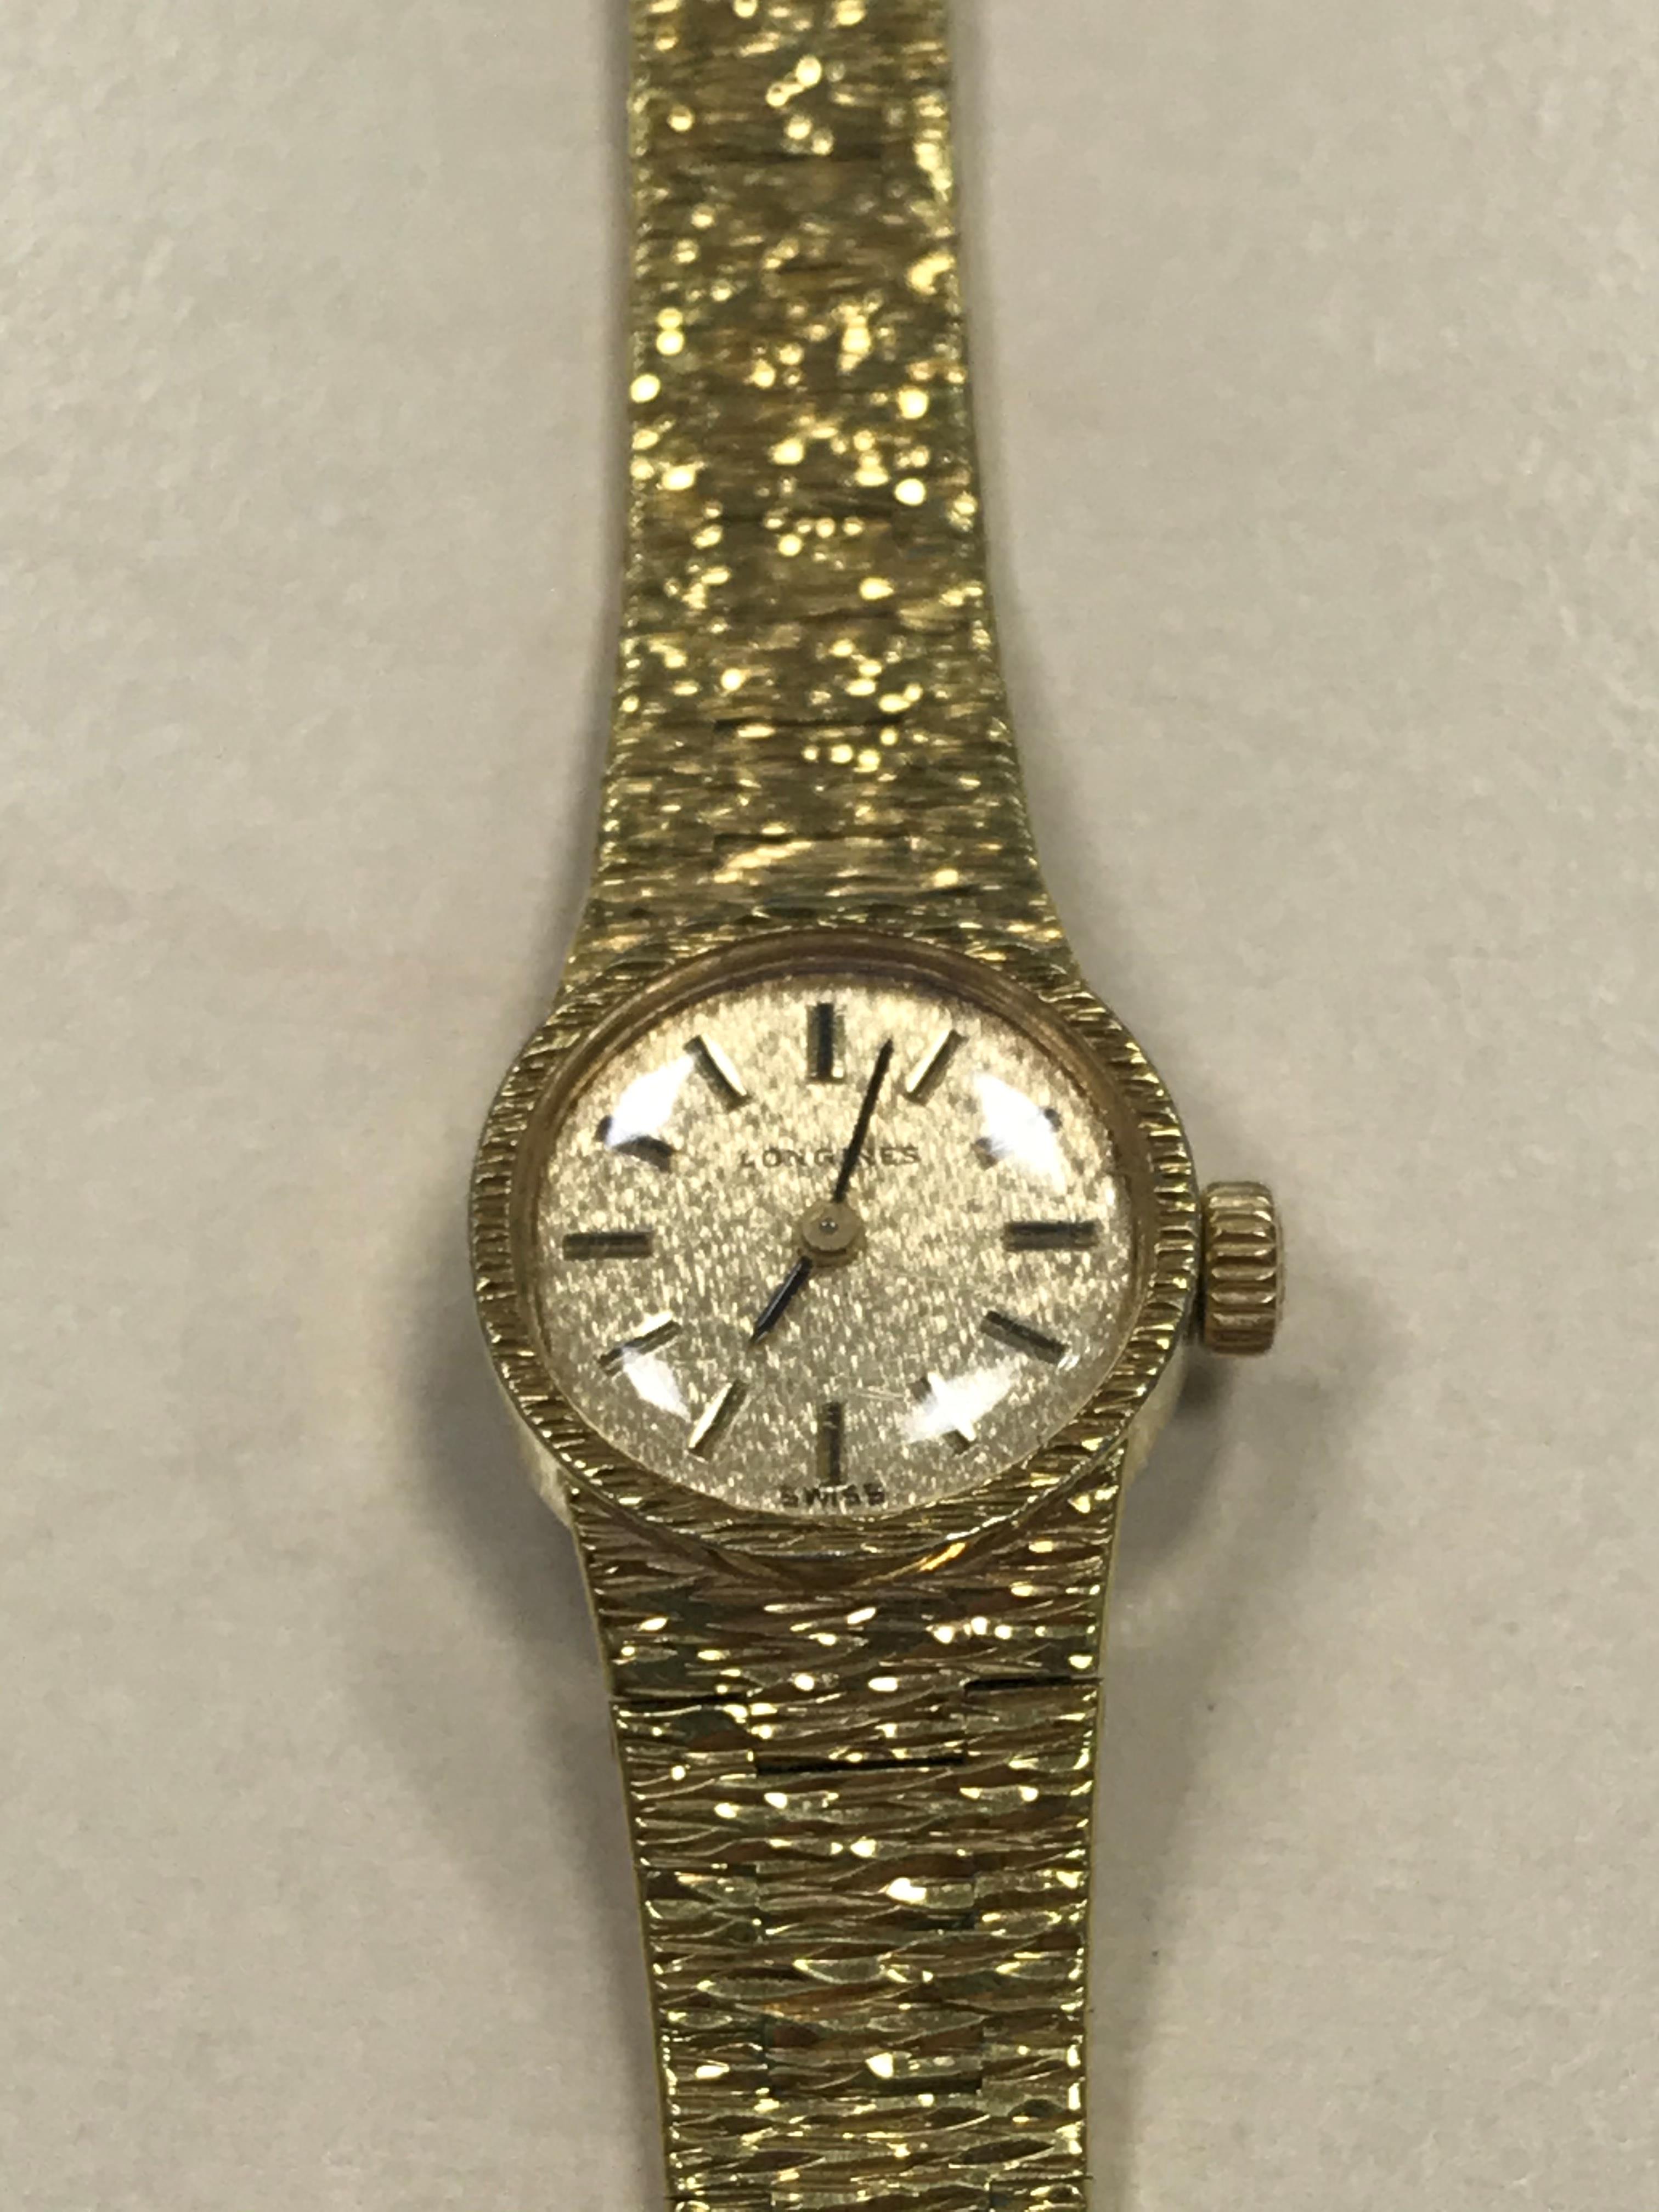 A LADY'S GOLD PLATED LONGINES WRIST WATCH - Image 3 of 5